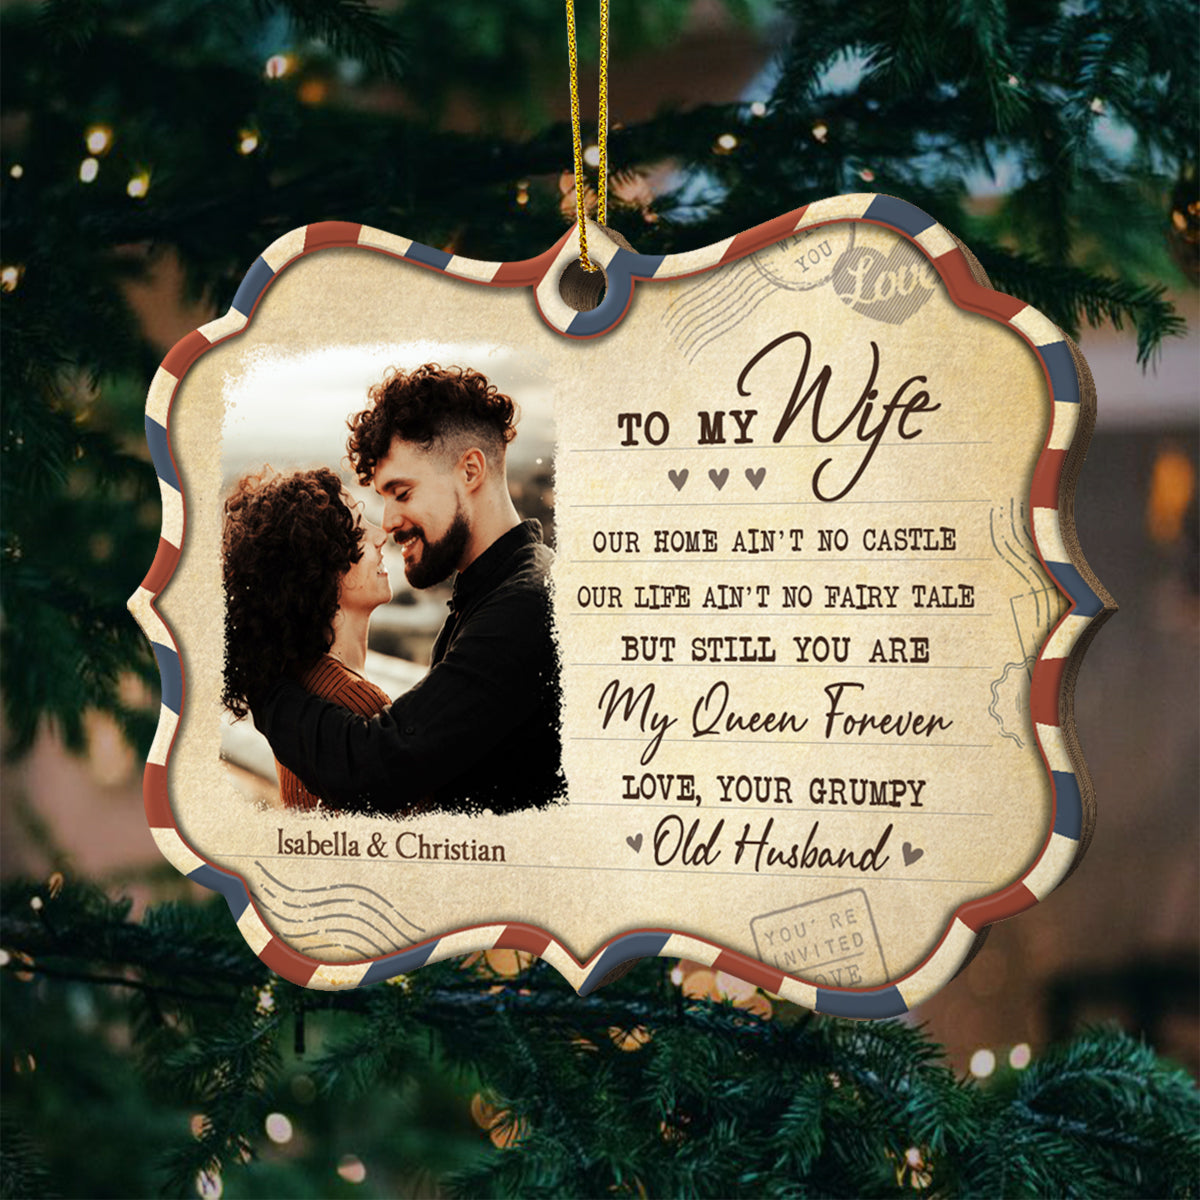 What Will Matter Is That I Had You And You Had Me - Upload Image, Gift For Couples - Personalized Shaped Ornament